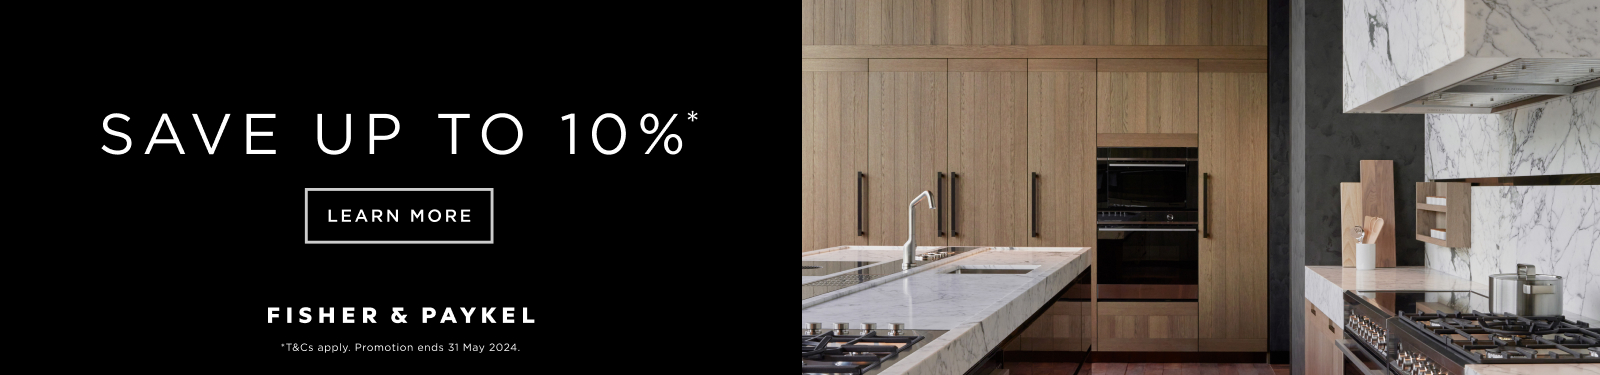 Save Up To 10% On Selected Fisher & Paykel Appliances